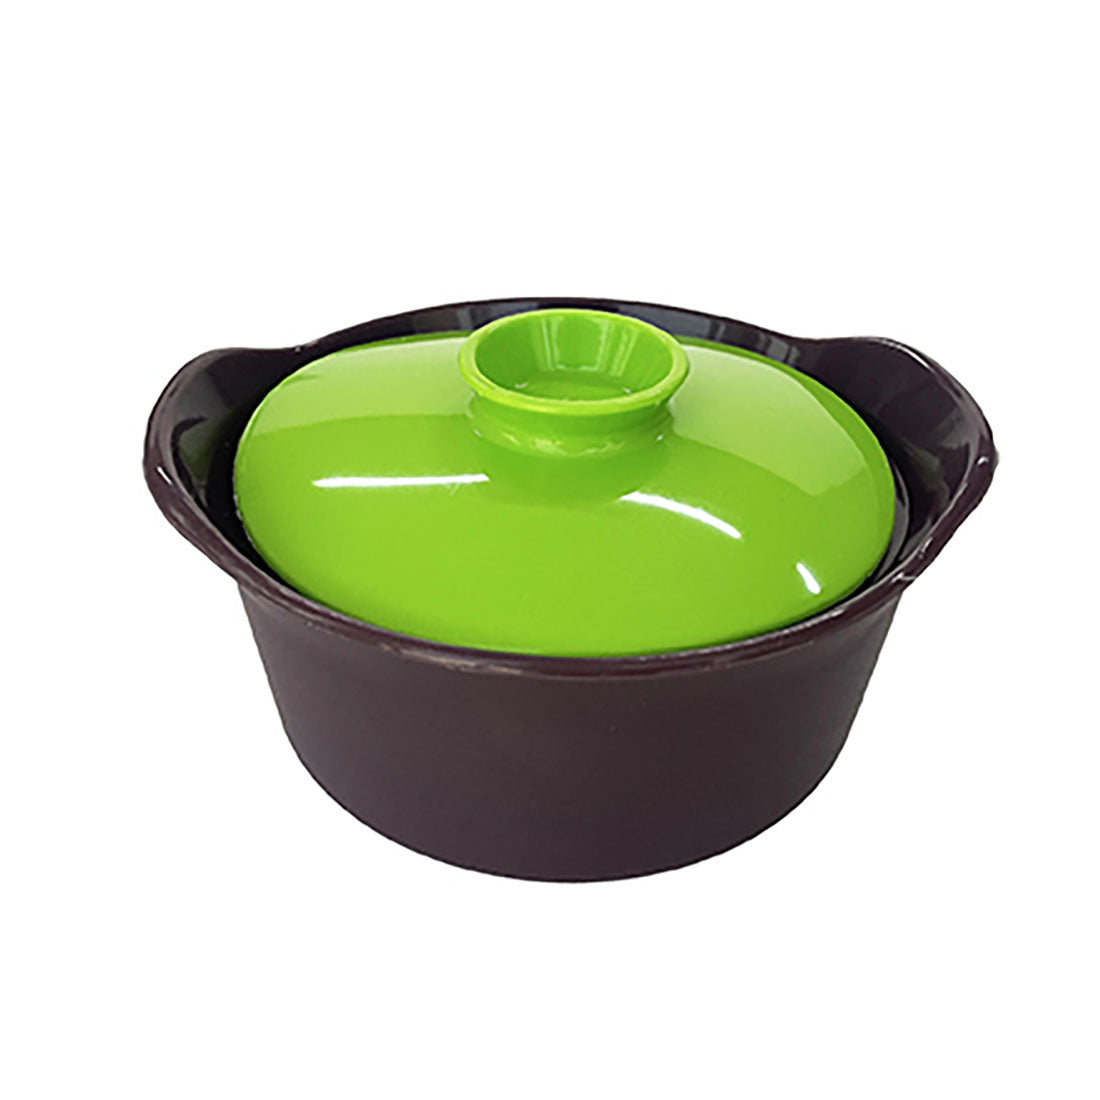 Pamire Silicone Microwave Egg Steaming Pot Steamer Egg Cooker (Green)